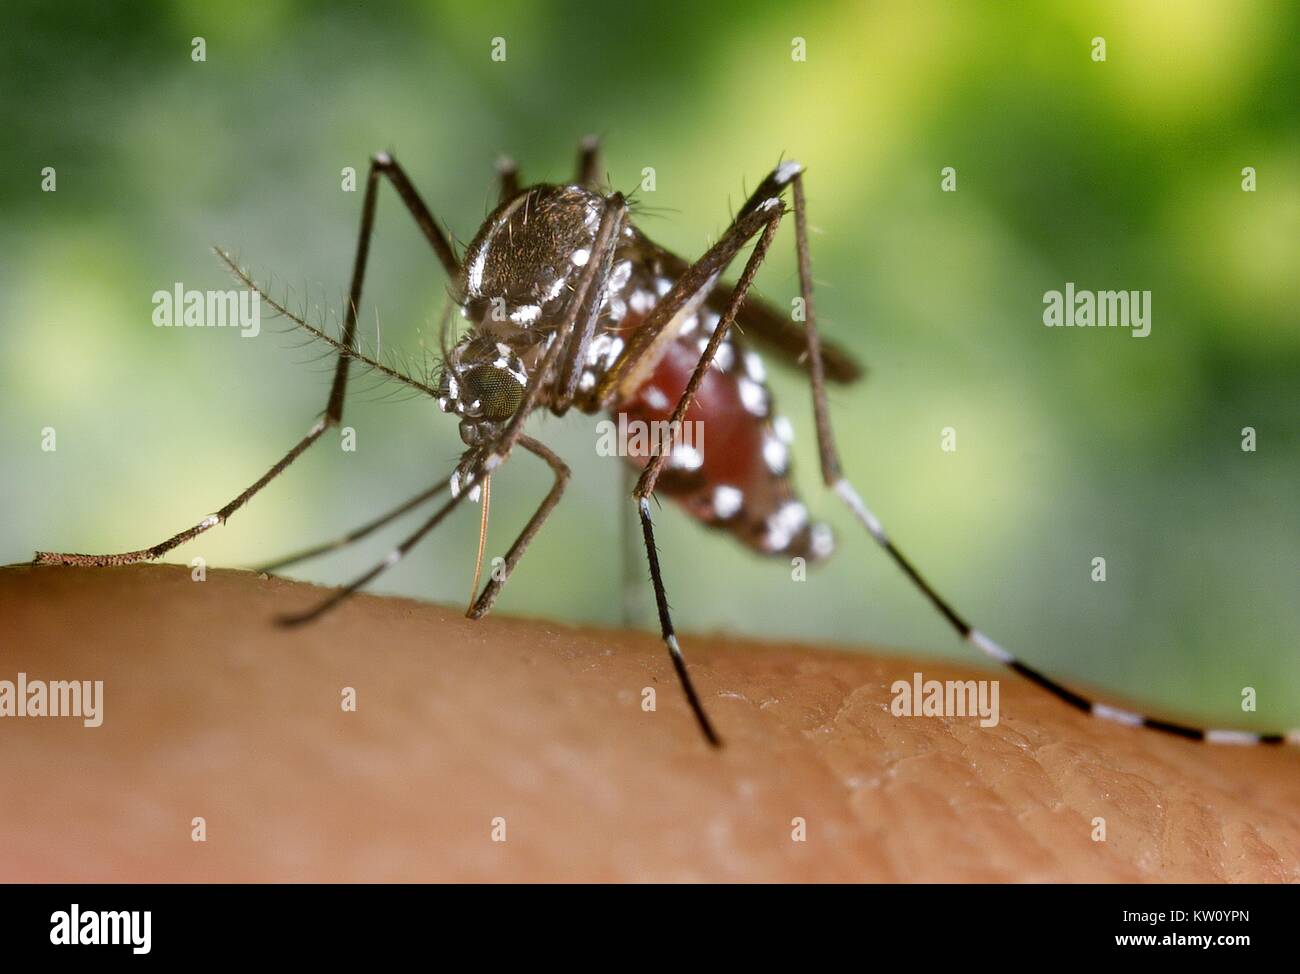 A blood-engorged female Aedes albopictus mosquito feeding on a human host. Under successful experimental transmission, Aedes albopictus has been found to be a vector of West Nile Virus. Aedes is a genus of the Culicine family of mosquitoes. Image courtesy CDC/James Gathany, 2002. Stock Photo